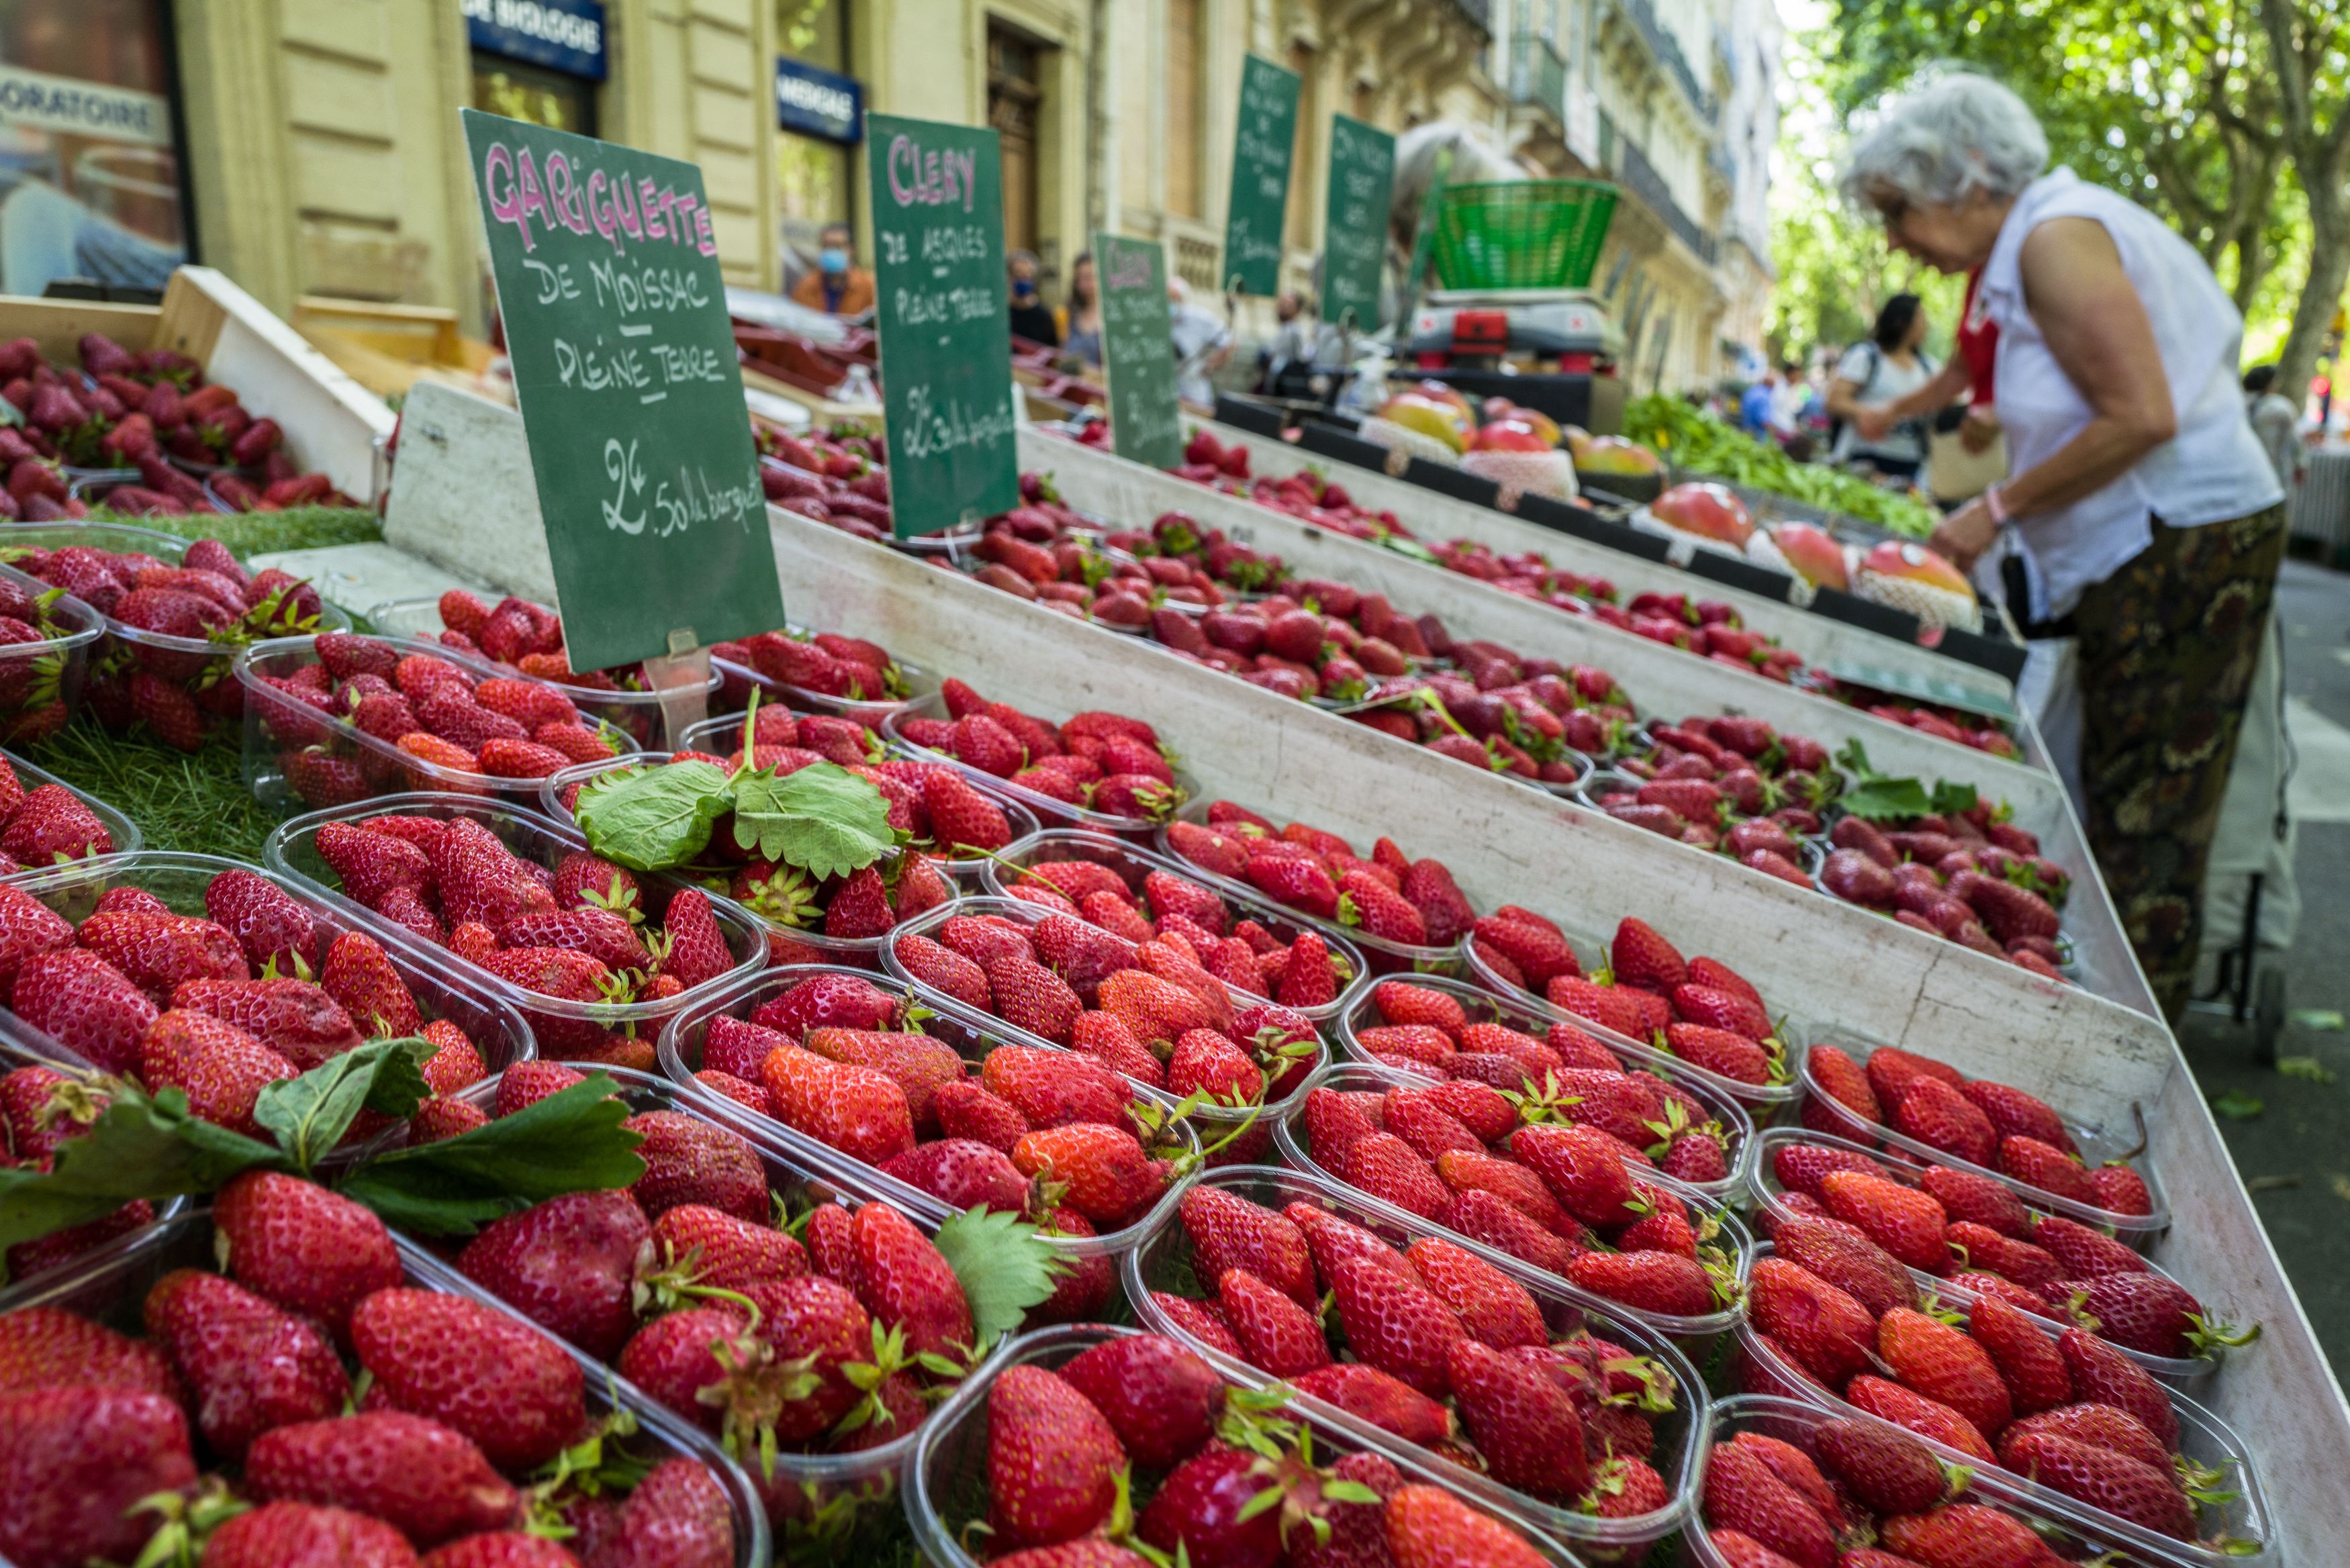 File photo: FDA says cases in California, Minnesota, and Canada report having purchased fresh organic strawberries prior to becoming ill